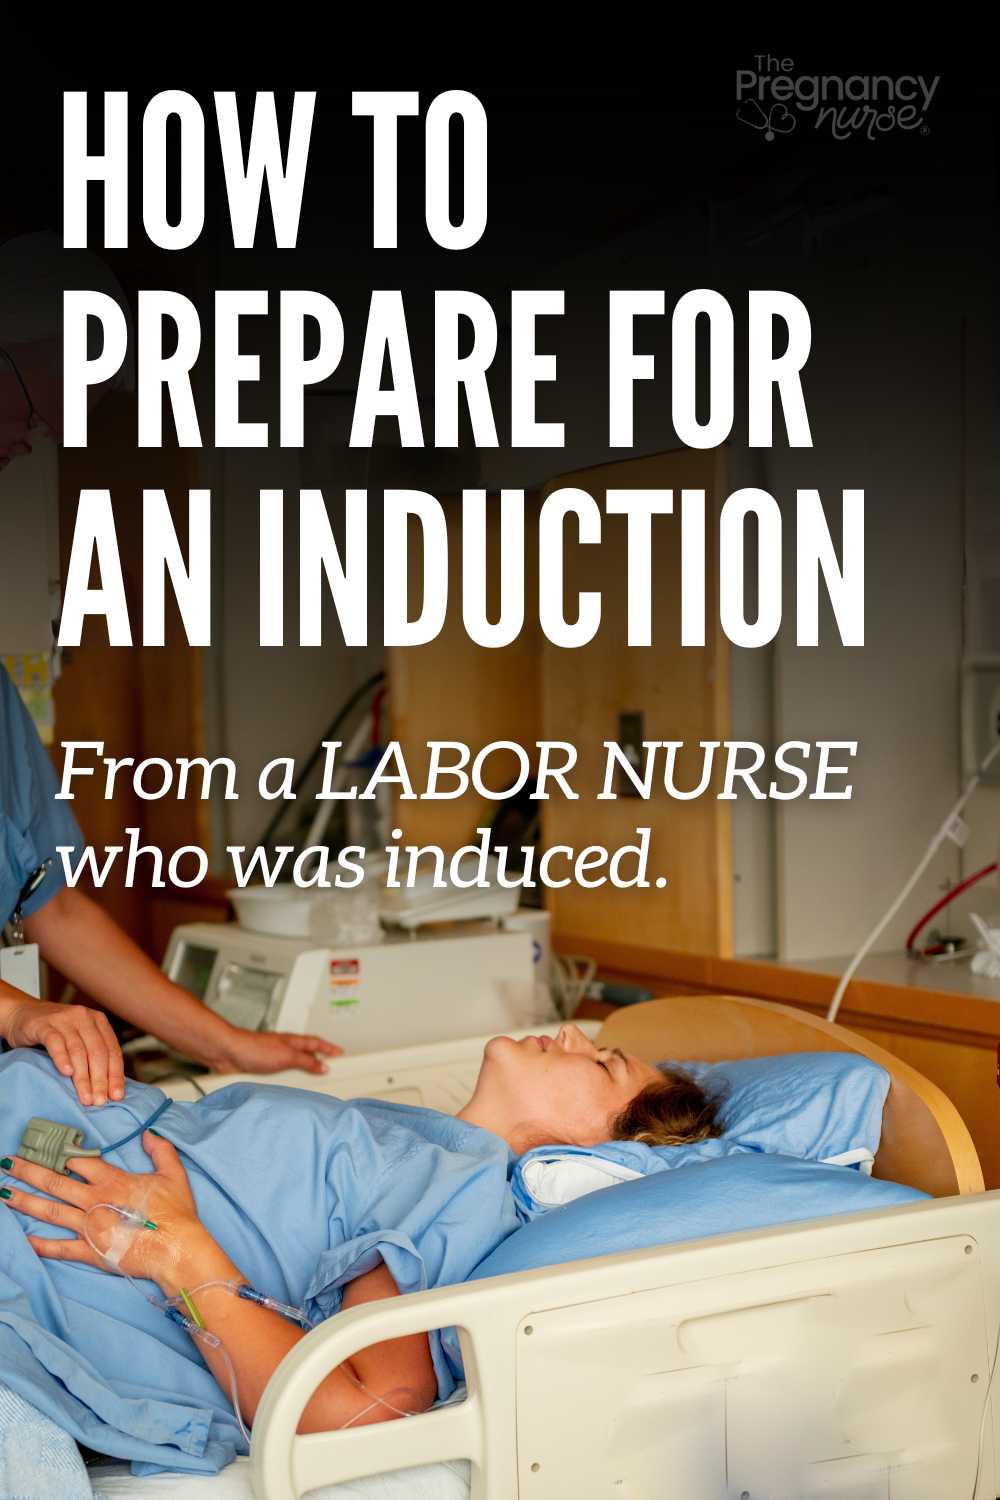 PREGNANT WOMAN IN THE BED how to prepare for an induction from a labor nurse who was induced.